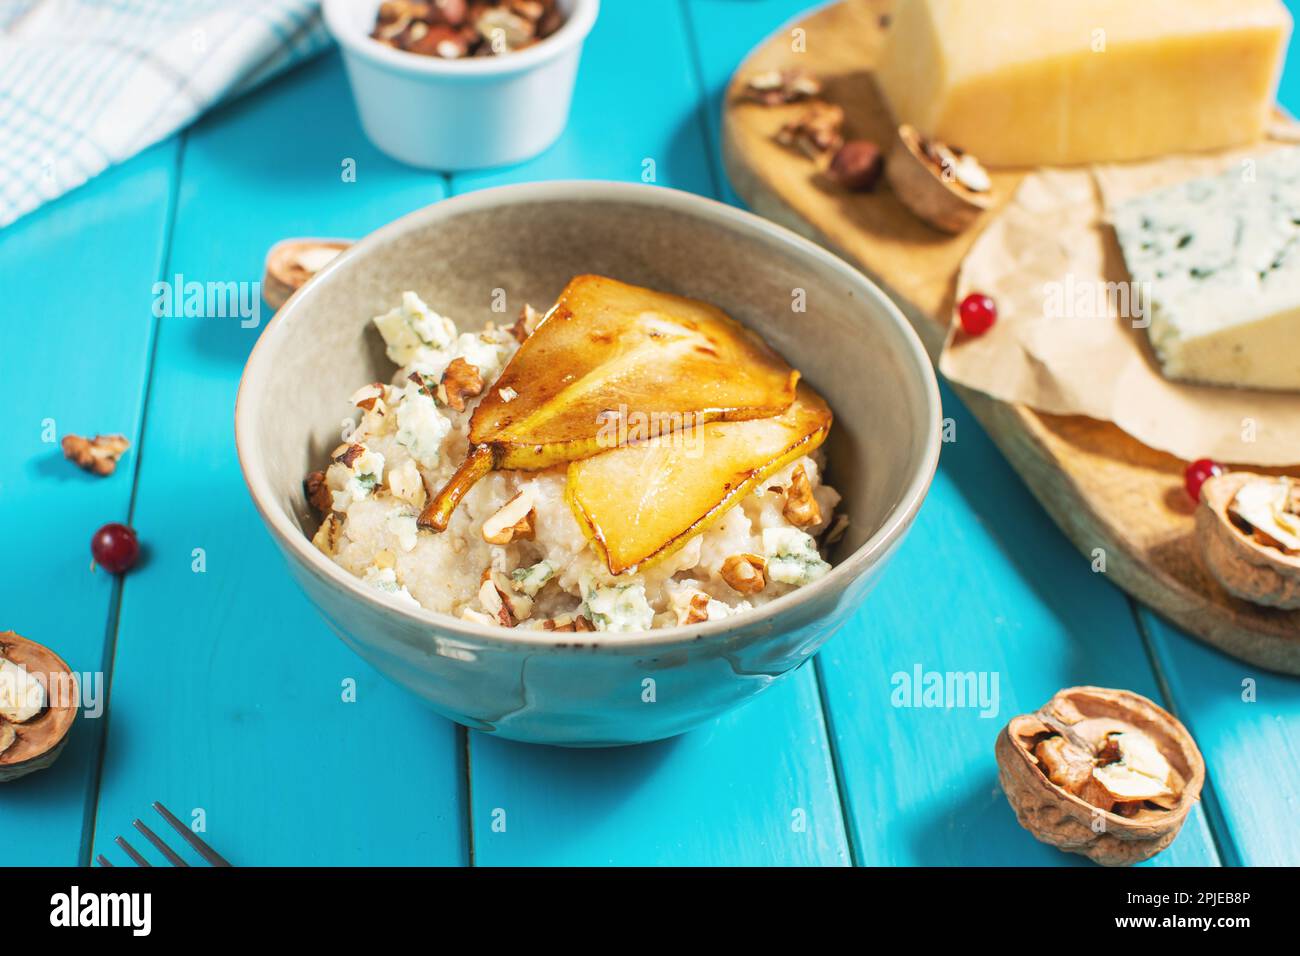 Pear and gorgonzola oatmeal with walnuts on blue wooden table. Stock Photo